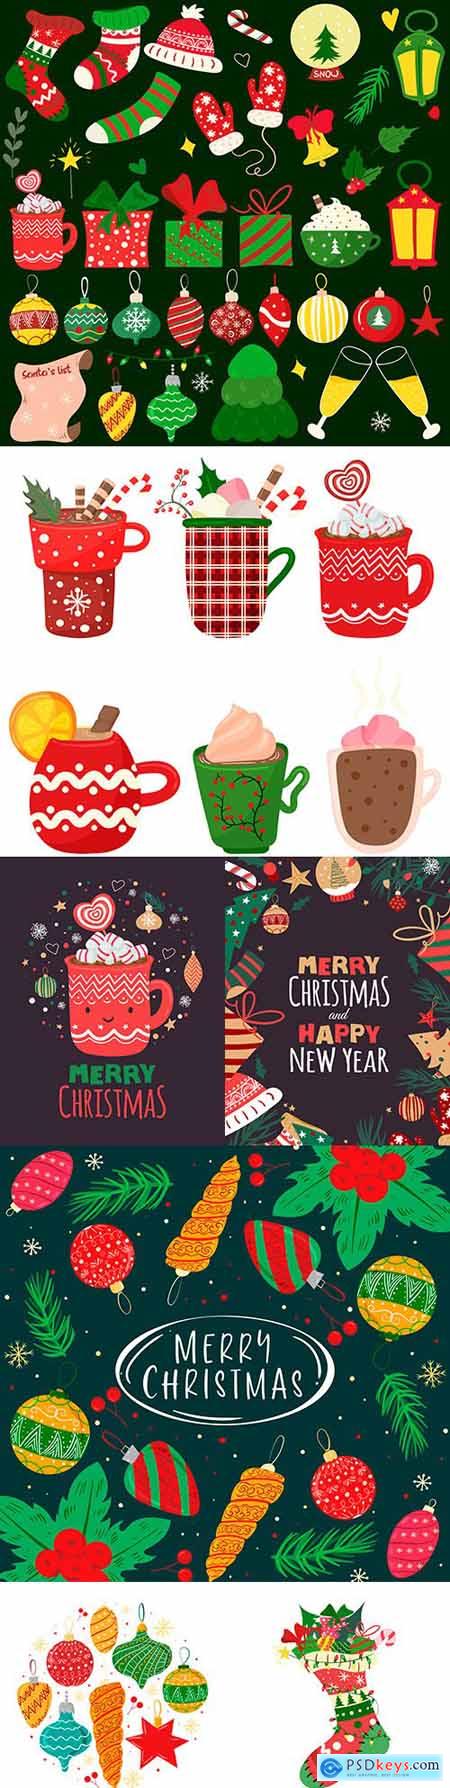 Christmas themed decorations and flat design elements